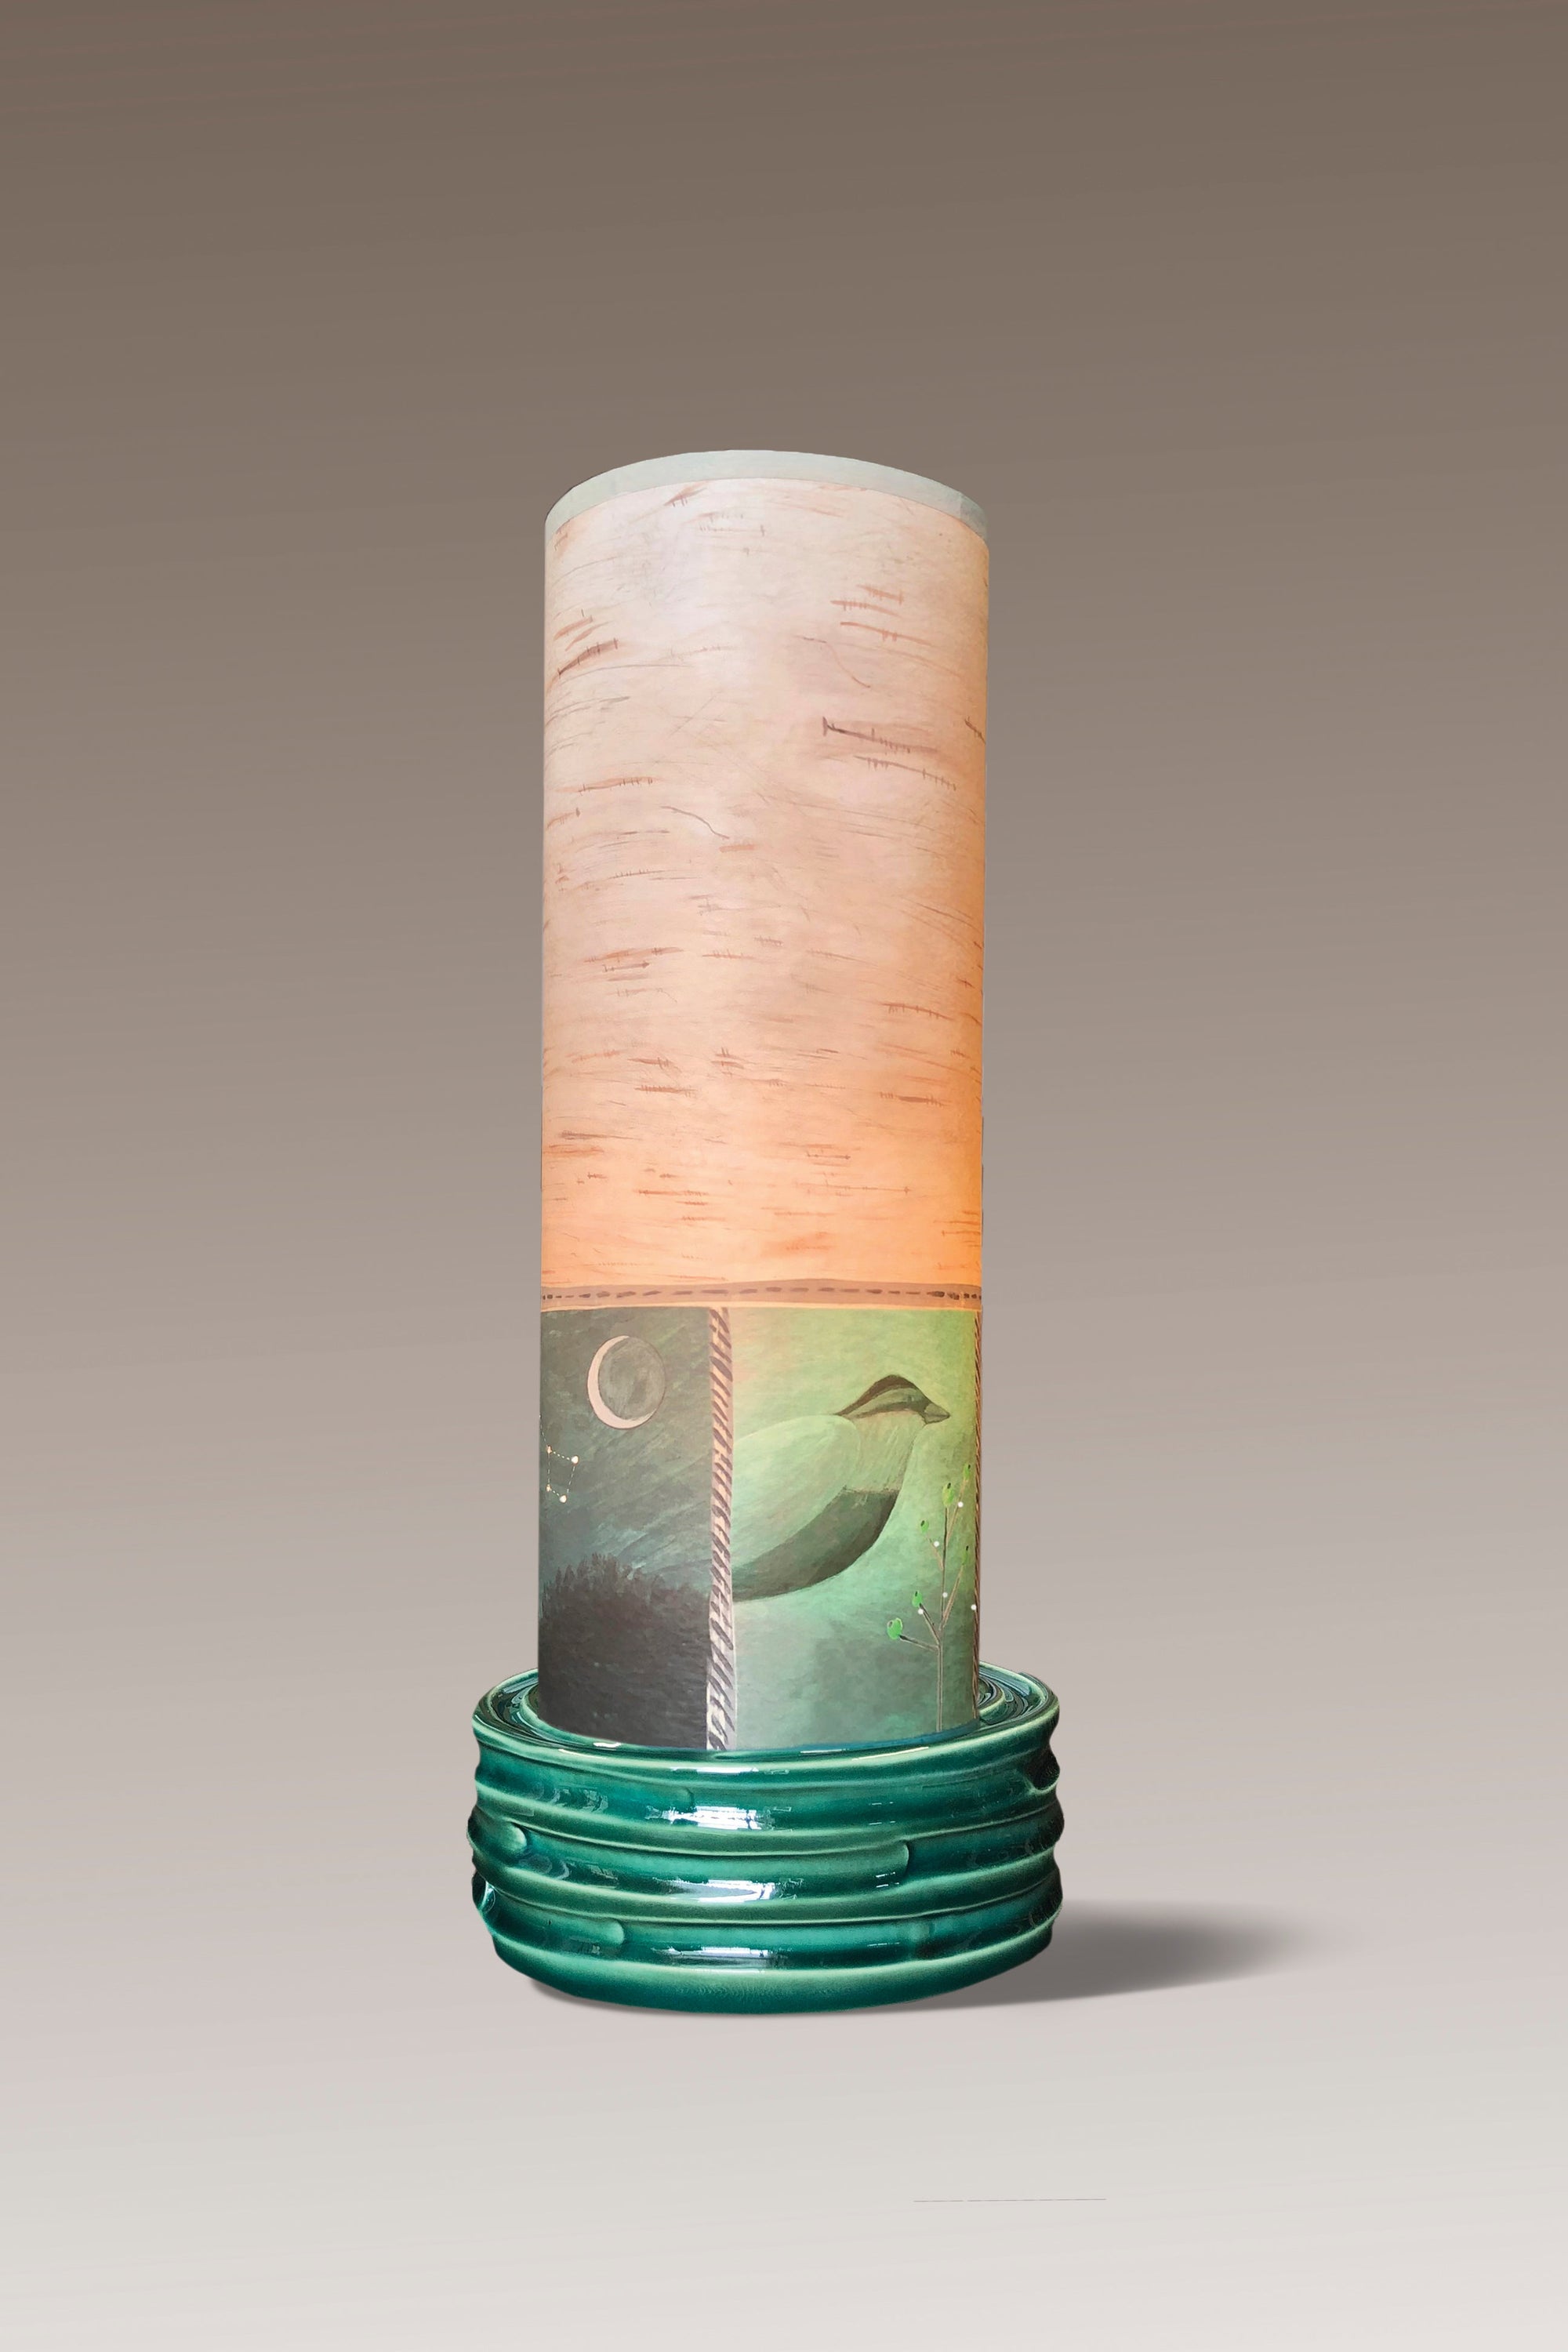 Janna Ugone & Co Luminaires Ceramic Luminaire Accent Lamp with Woodland Trails in Birch Shade